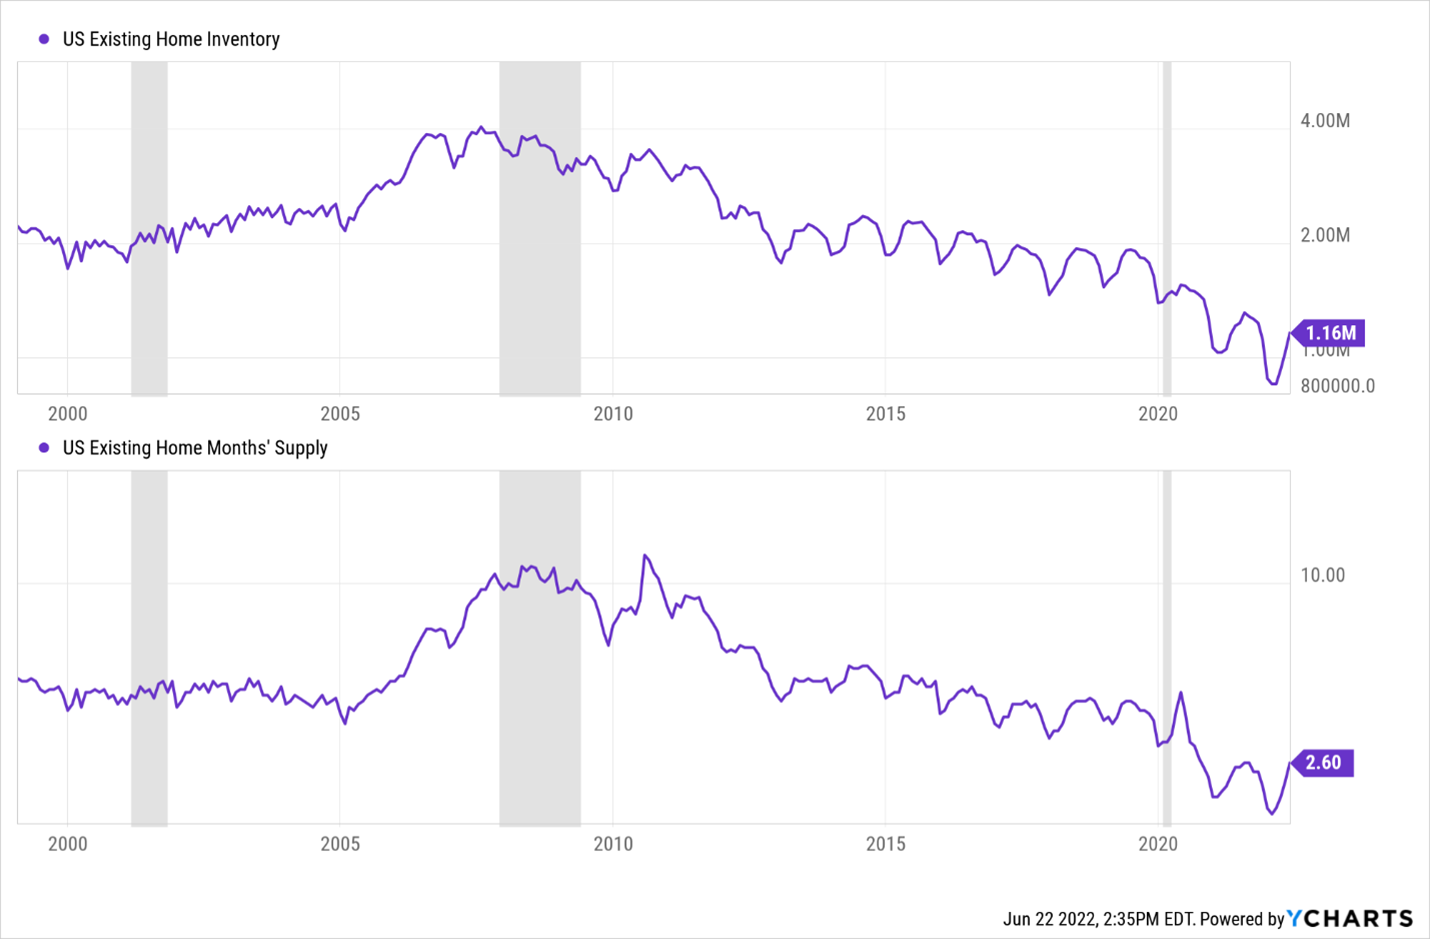 Graphs depicting the change in US homes inventory/supply